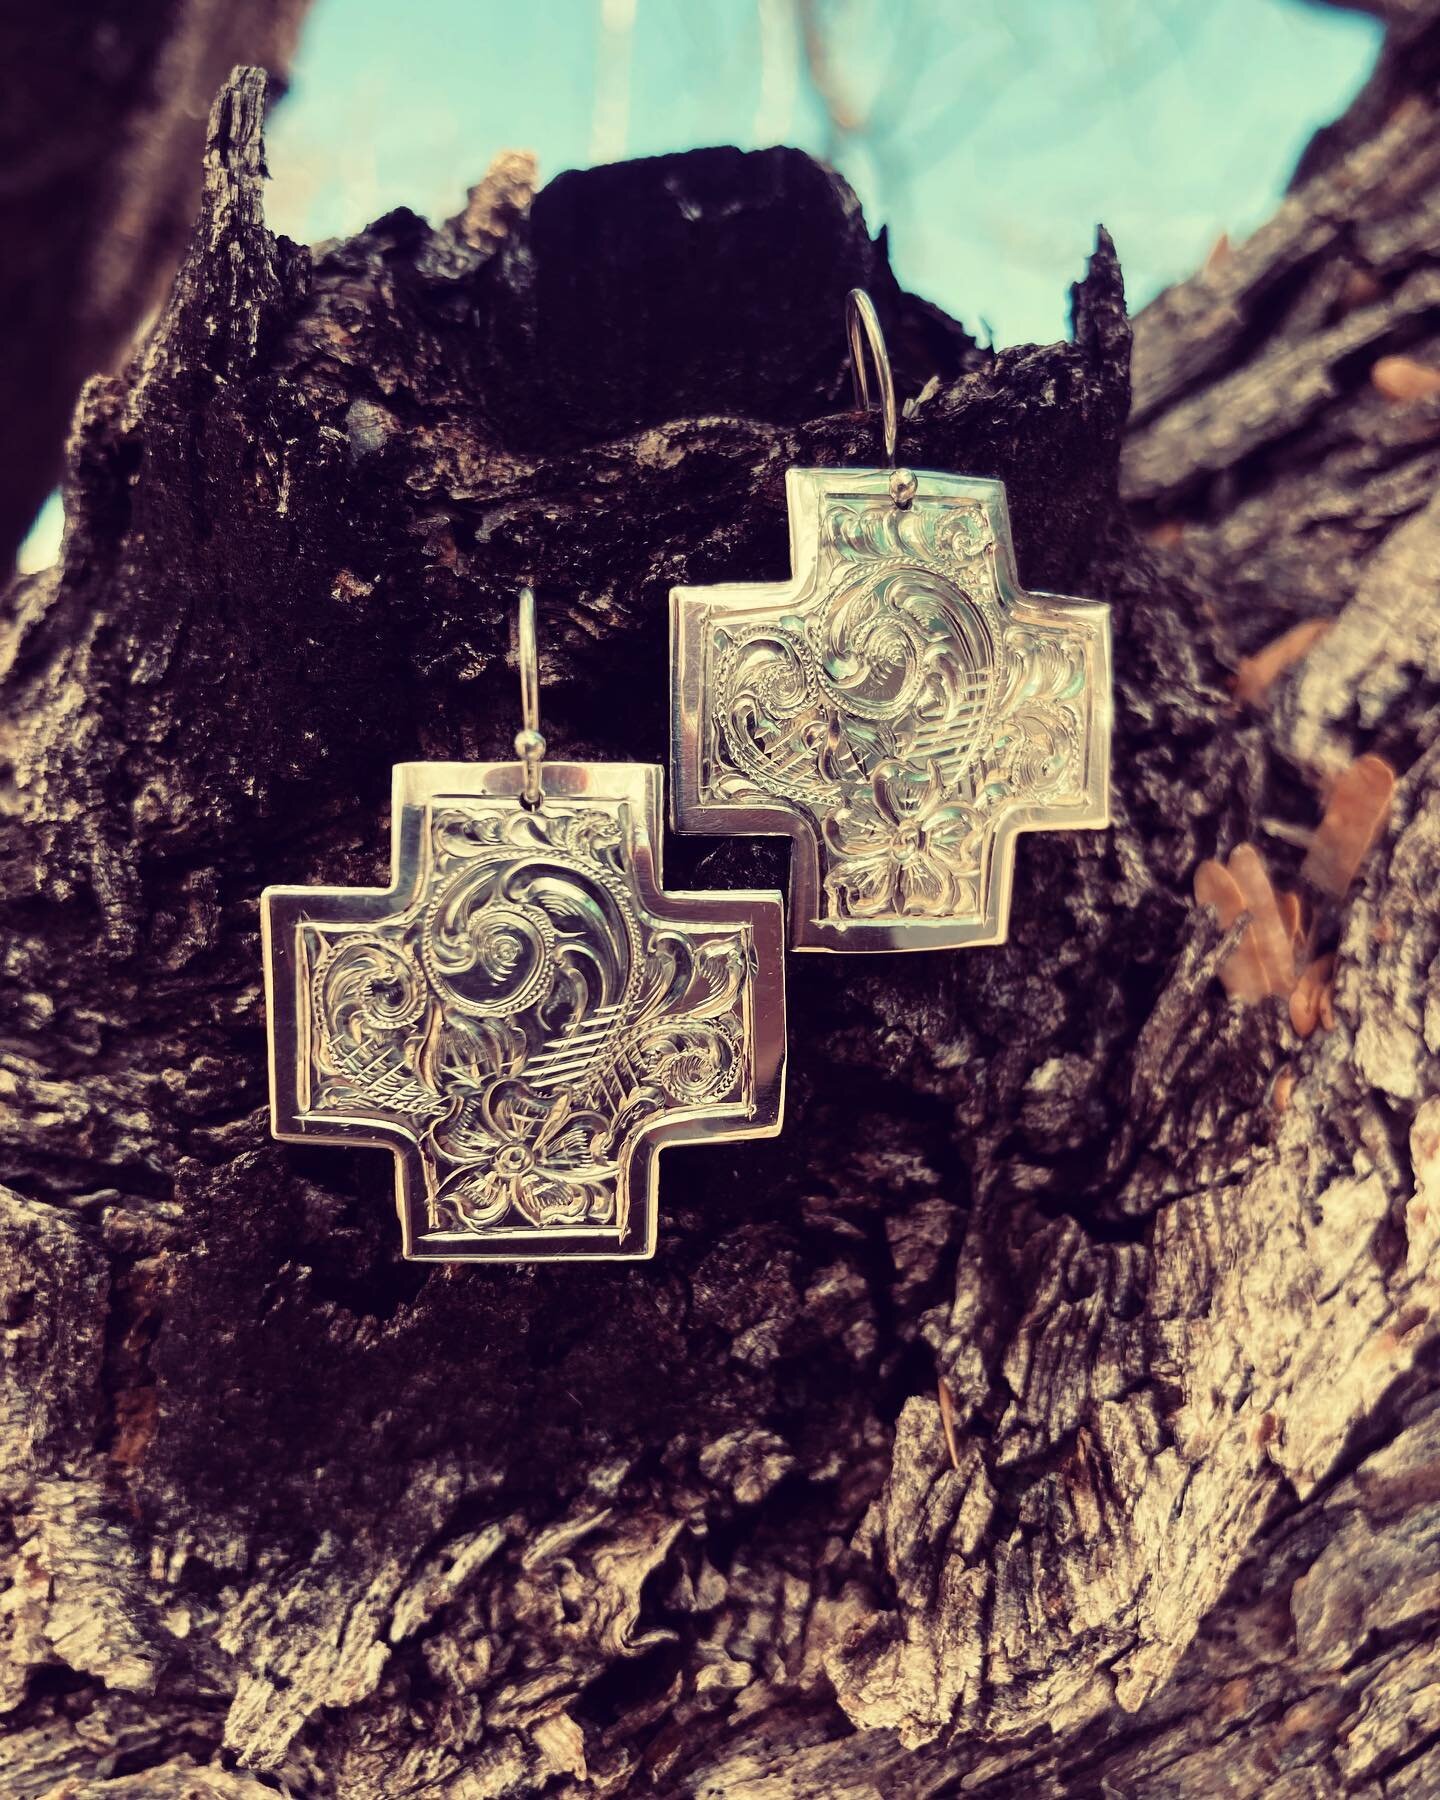 SOLD 1 inch Sterling Silver engraved cross earrings. Available for Valentine&rsquo;s Day❣️ #courtneywarnersilver #sterlingvalentine #handengravedcross #silverforyoursweetheart